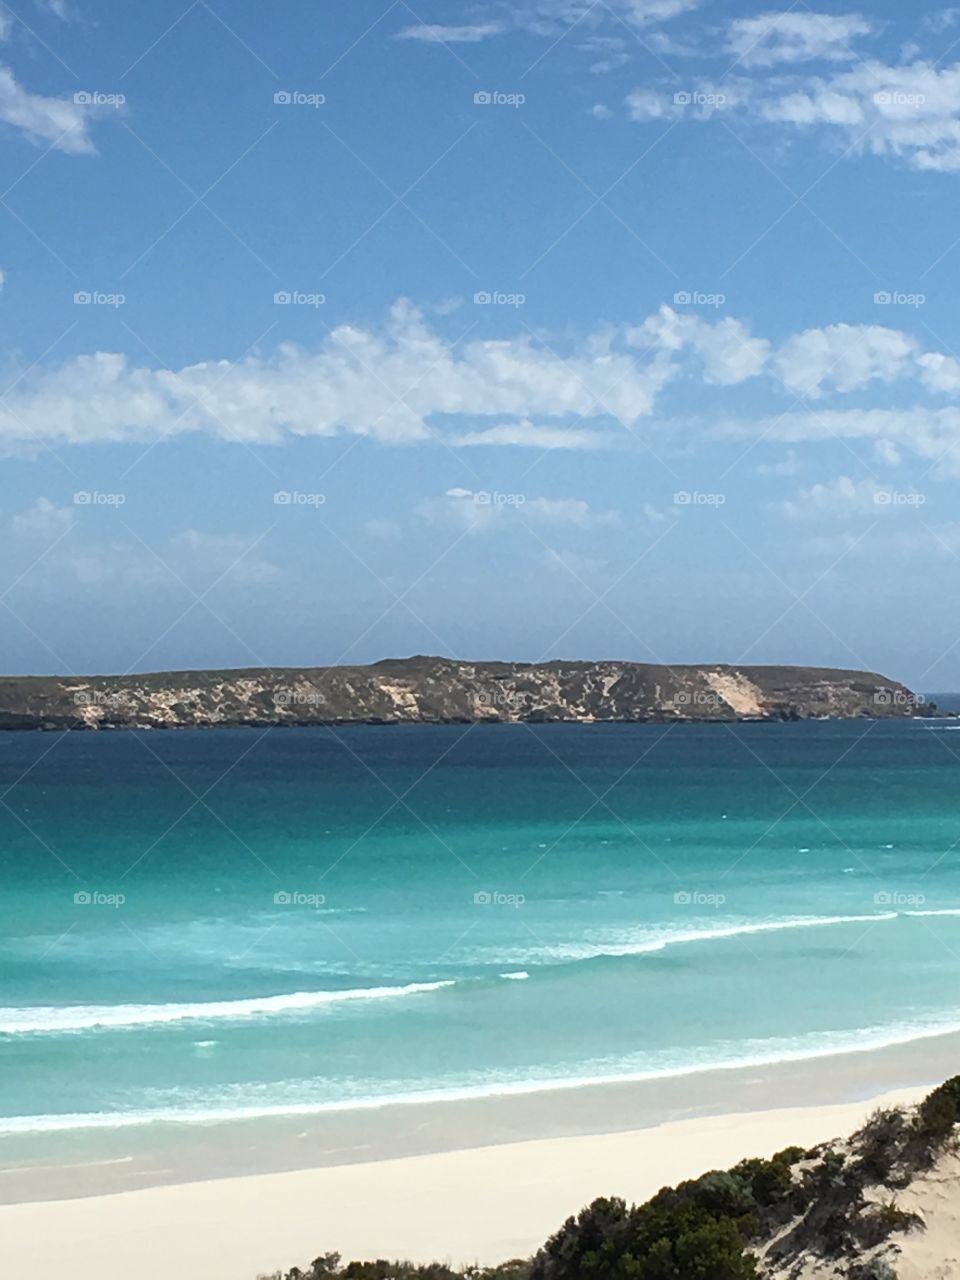 Island off the south Australian coast view from awesome remote beach with turquoise blue ocean and reefs